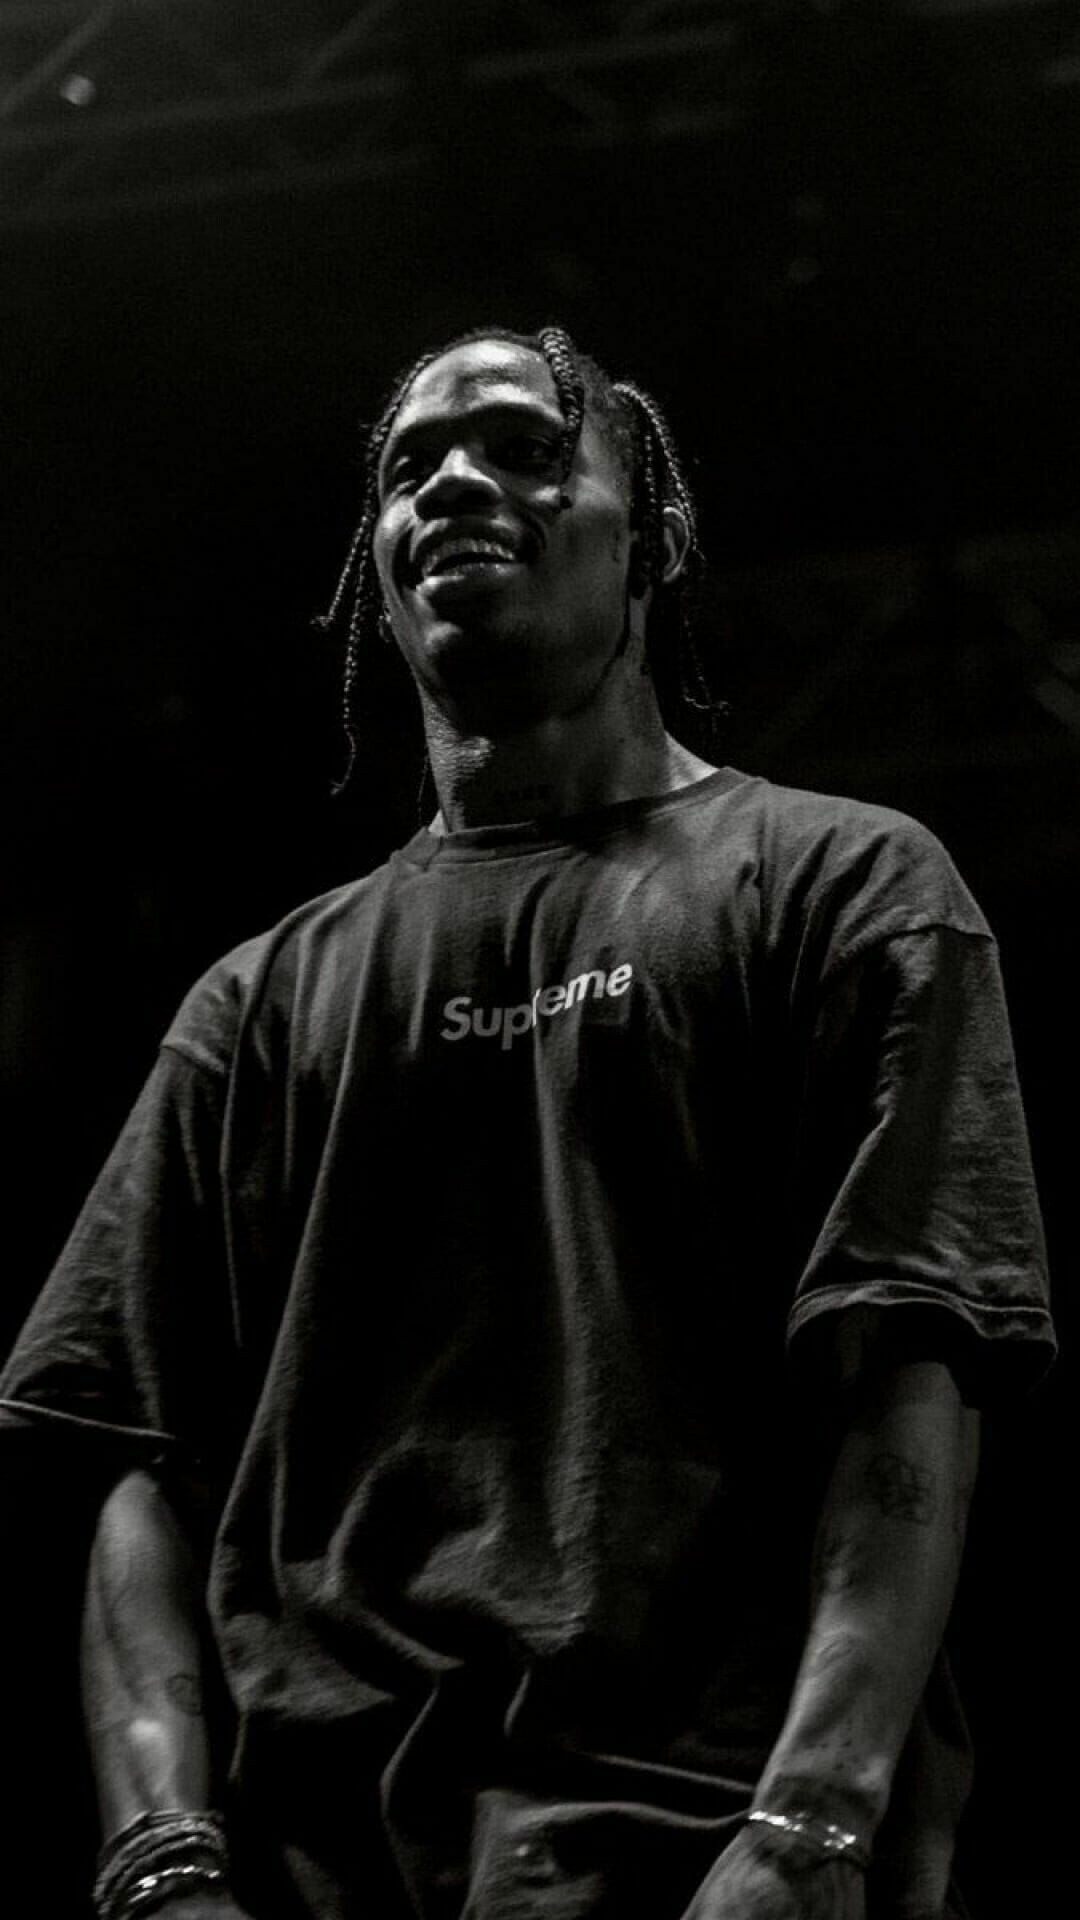 Travis Scott: Rapper, Collaborated with artists such as Post Malone, Wiz Khalifa, and Gucci Mane, Monochrome. 1080x1920 Full HD Background.